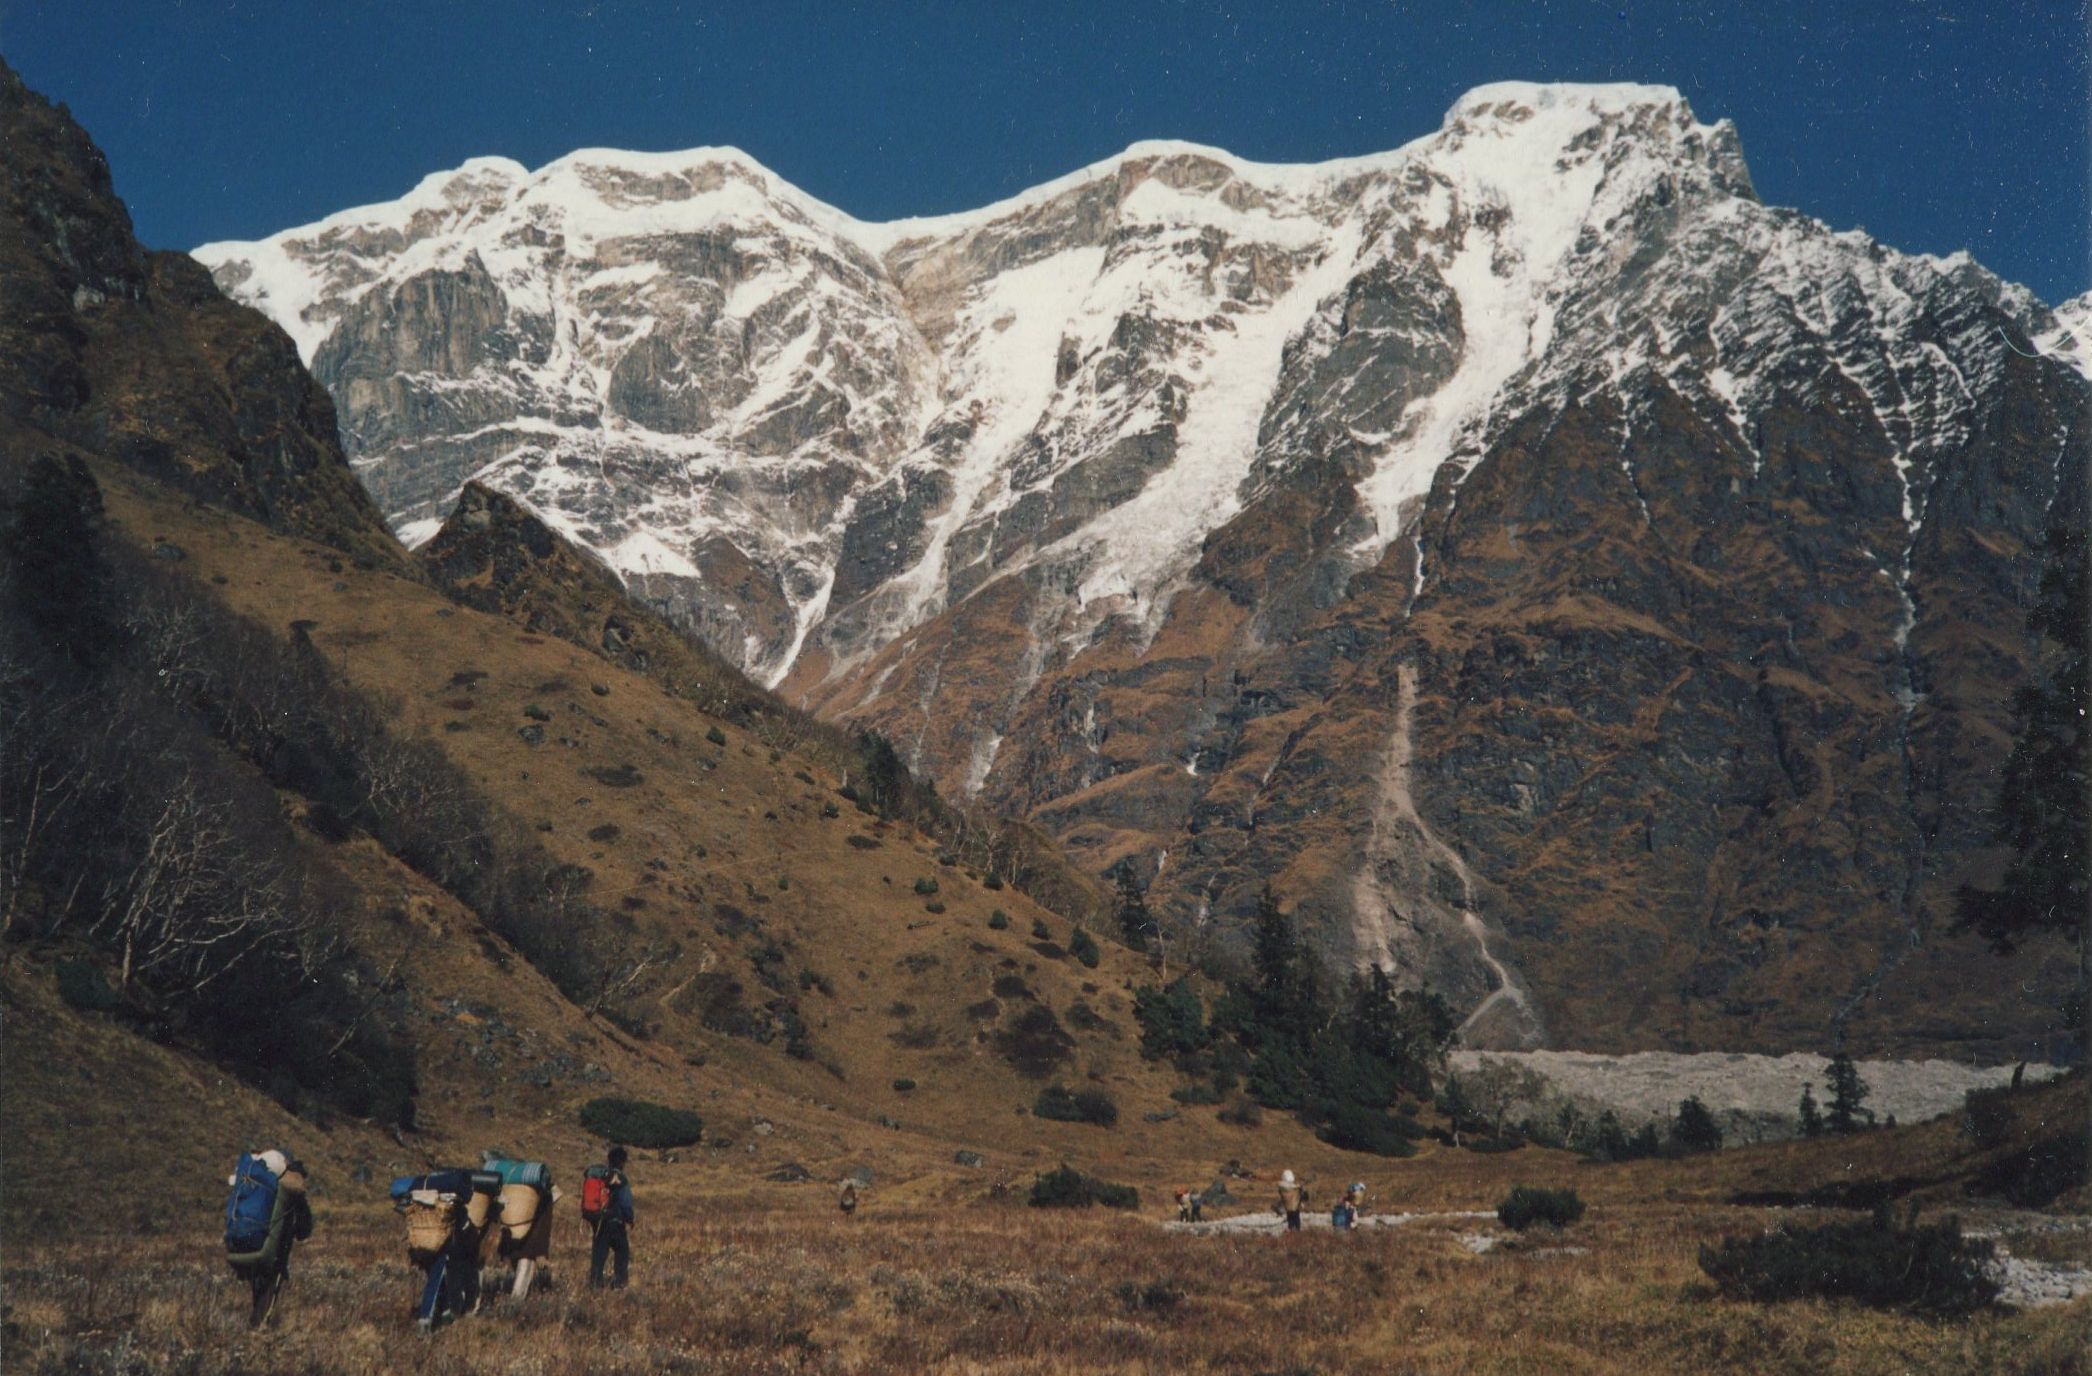 Himal Chuli ( 7893m ) on the approach to the Chuling Glacier from Rupina La